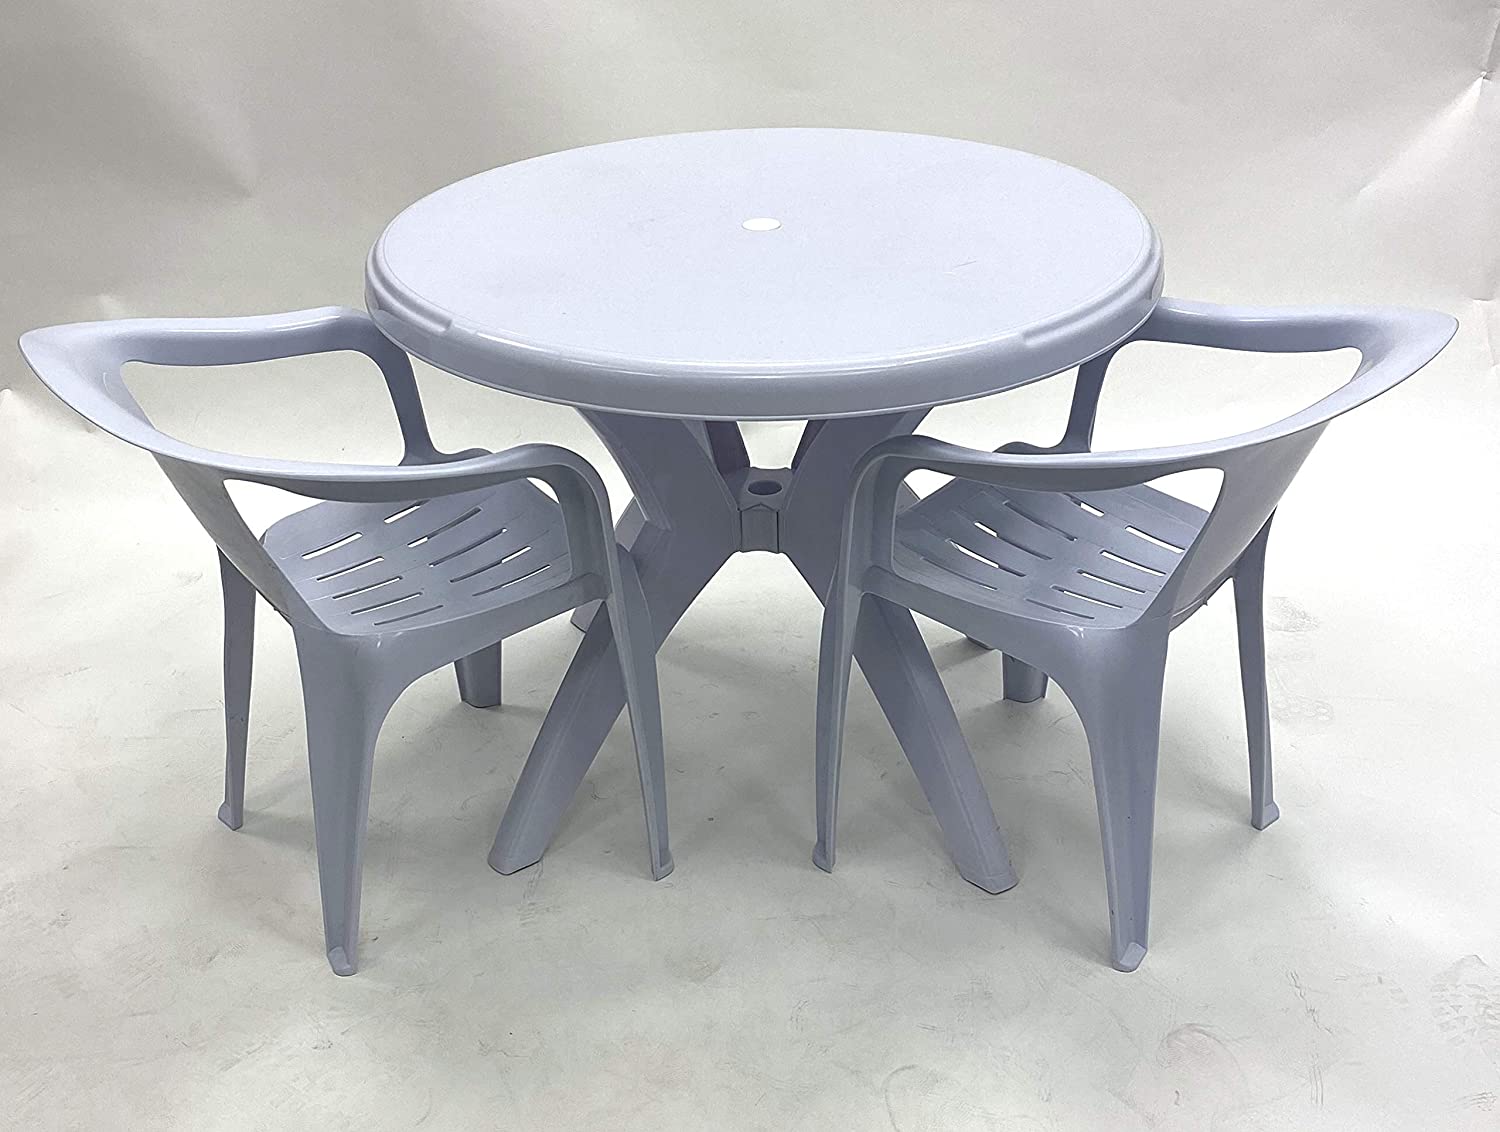 White Plastic Garden Furniture - Round Table, 2 x Statted Chairs